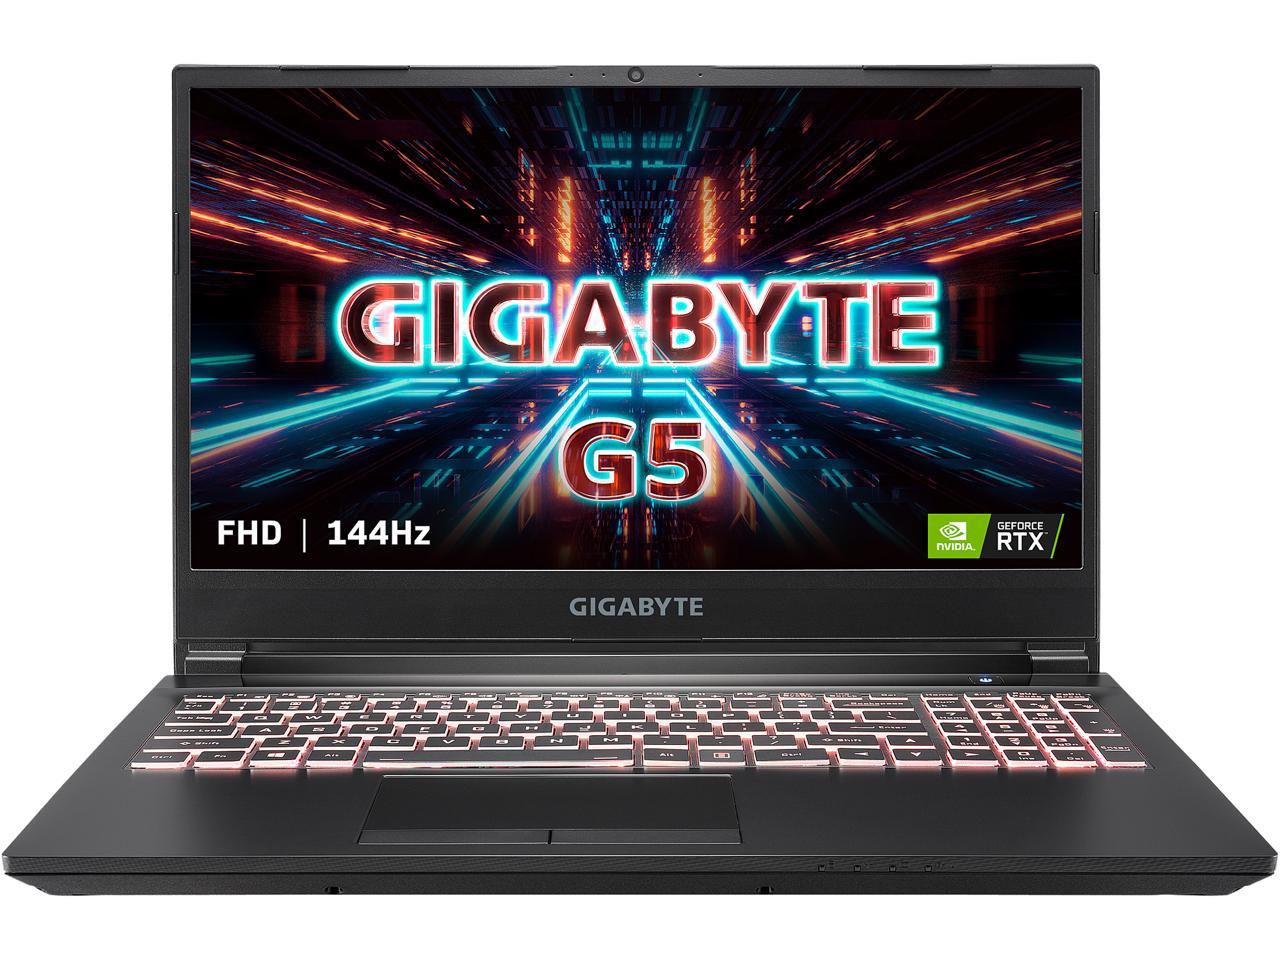 GIGABYTE G5 Gaming Notebook [Intel Core i5-10500H, 16GB RAM, 512GB SSD, GeForce RTX 3060, 15.6" IPS 144hz] for $999 w/ FS after MIR